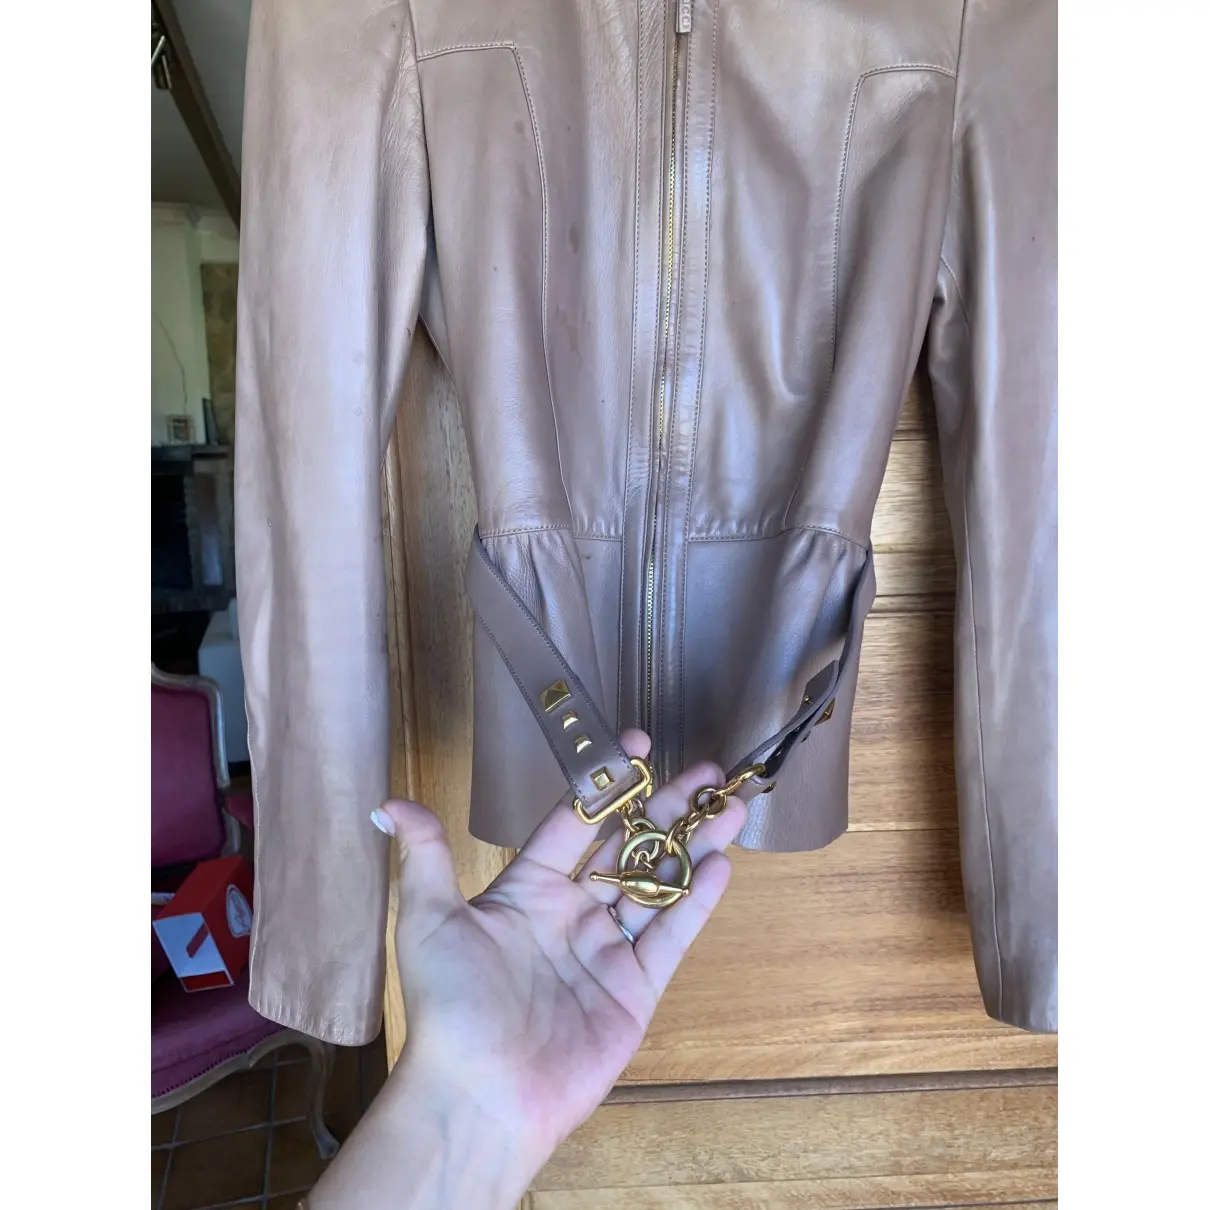 Buy Gucci Leather jacket online